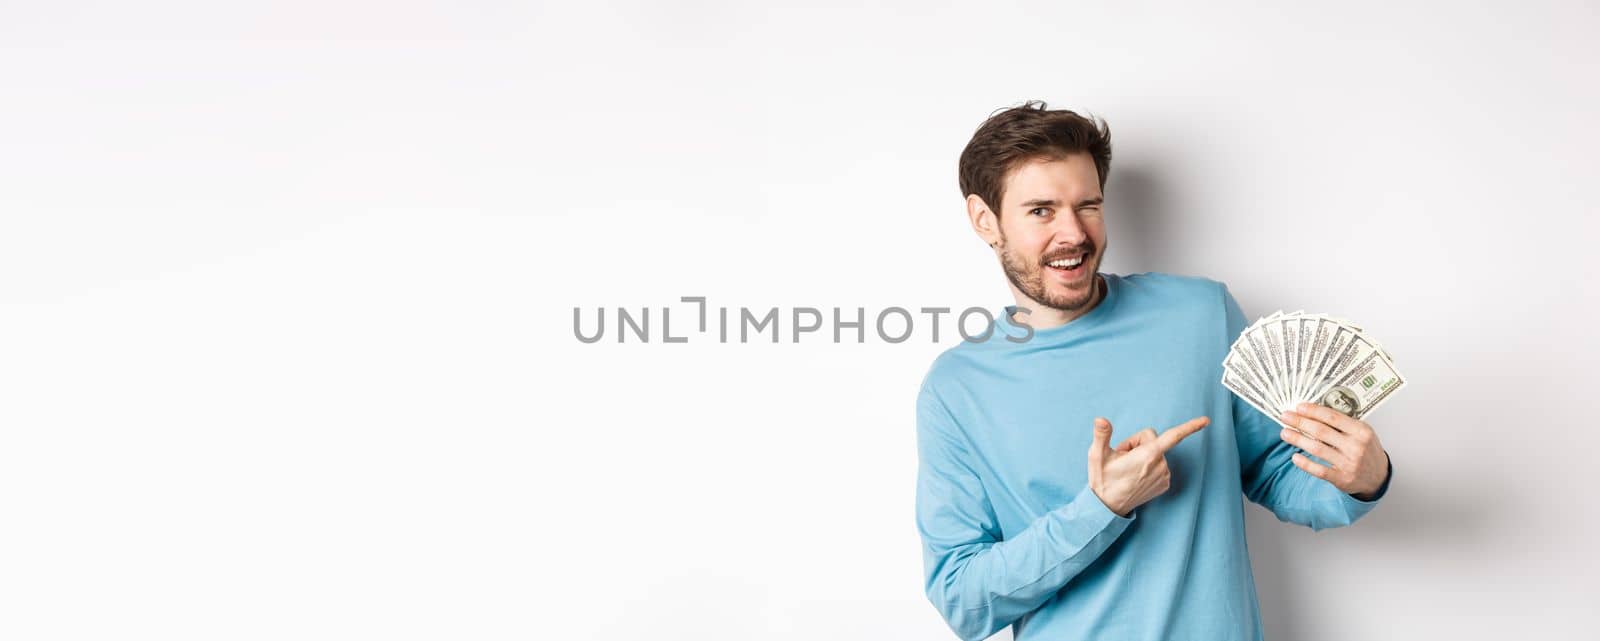 Handsome rich guy winking at camera, showing income, pointing finger at earned money and smiling, standing over white background.